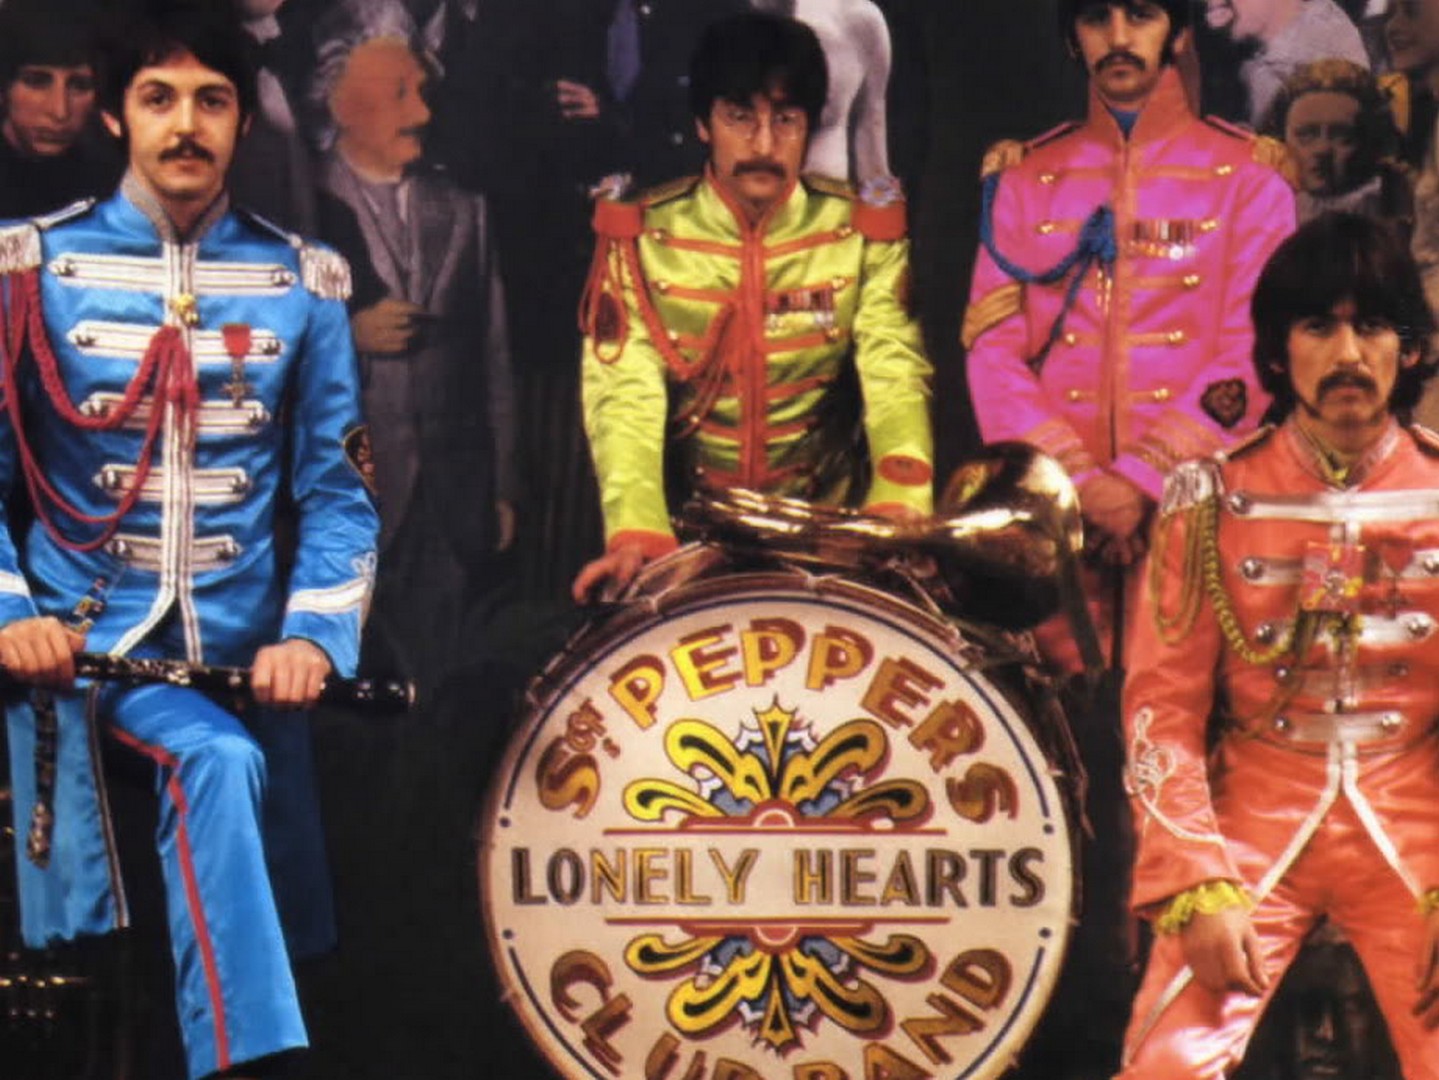 Beatles sgt pepper lonely. The Beatles сержант Пеппер. Sgt Pepper's Lonely Hearts Club Band. The Beatles Sgt. Pepper's Lonely Hearts Club Band 1967. The Beatles Sgt Pepper оркестр 1967.